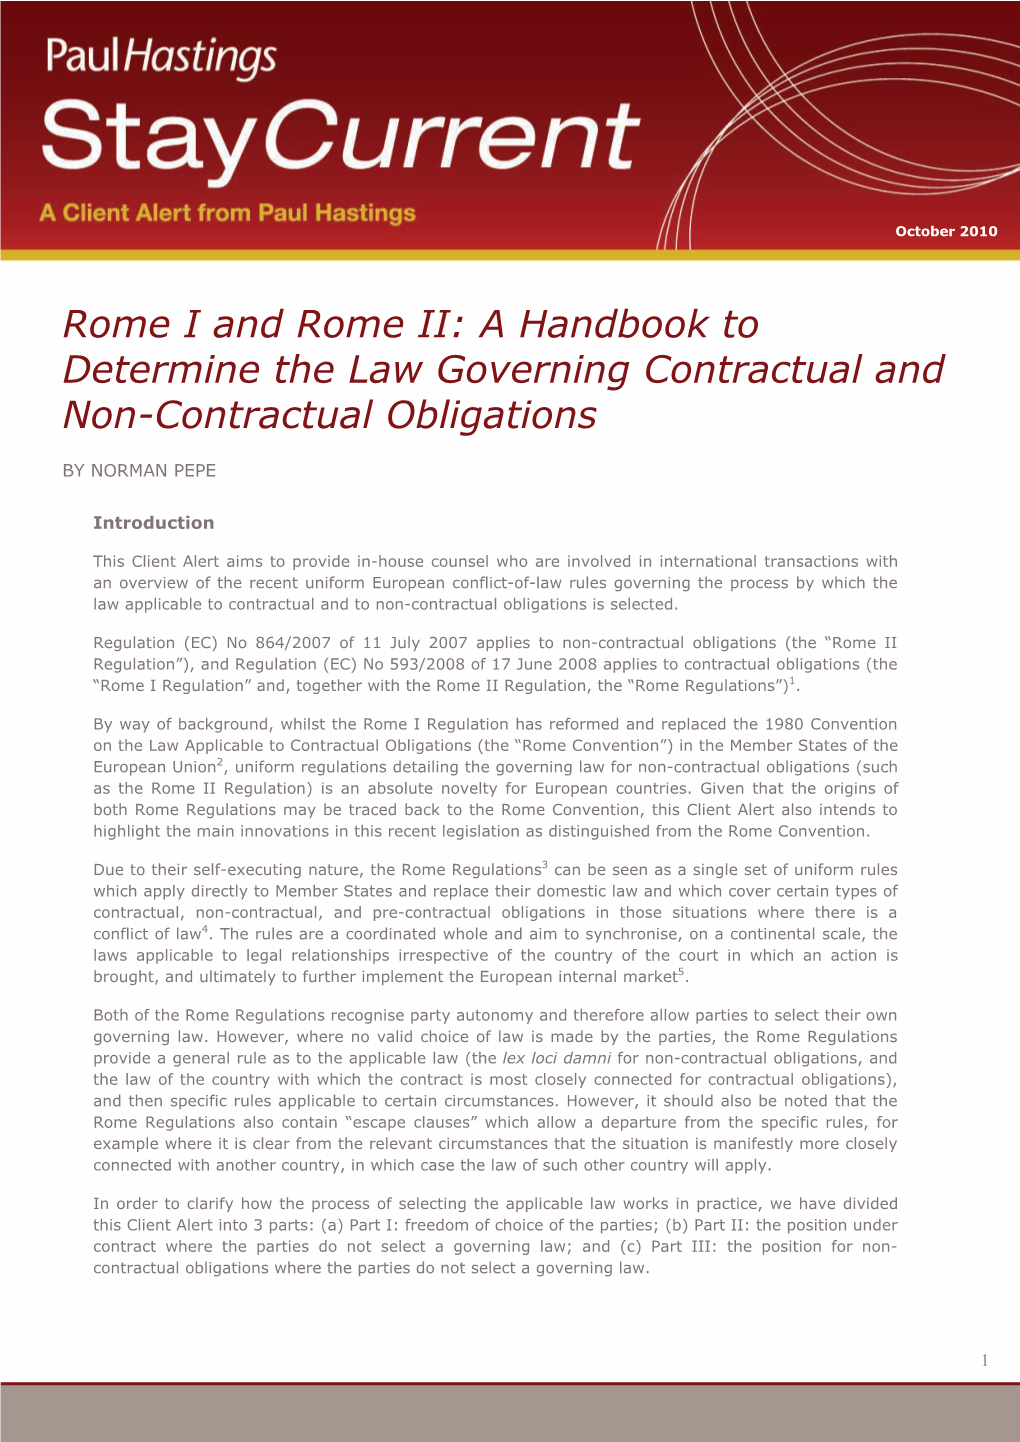 Rome I and Rome II: a Handbook to Determine the Law Governing Contractual and Non-Contractual Obligations